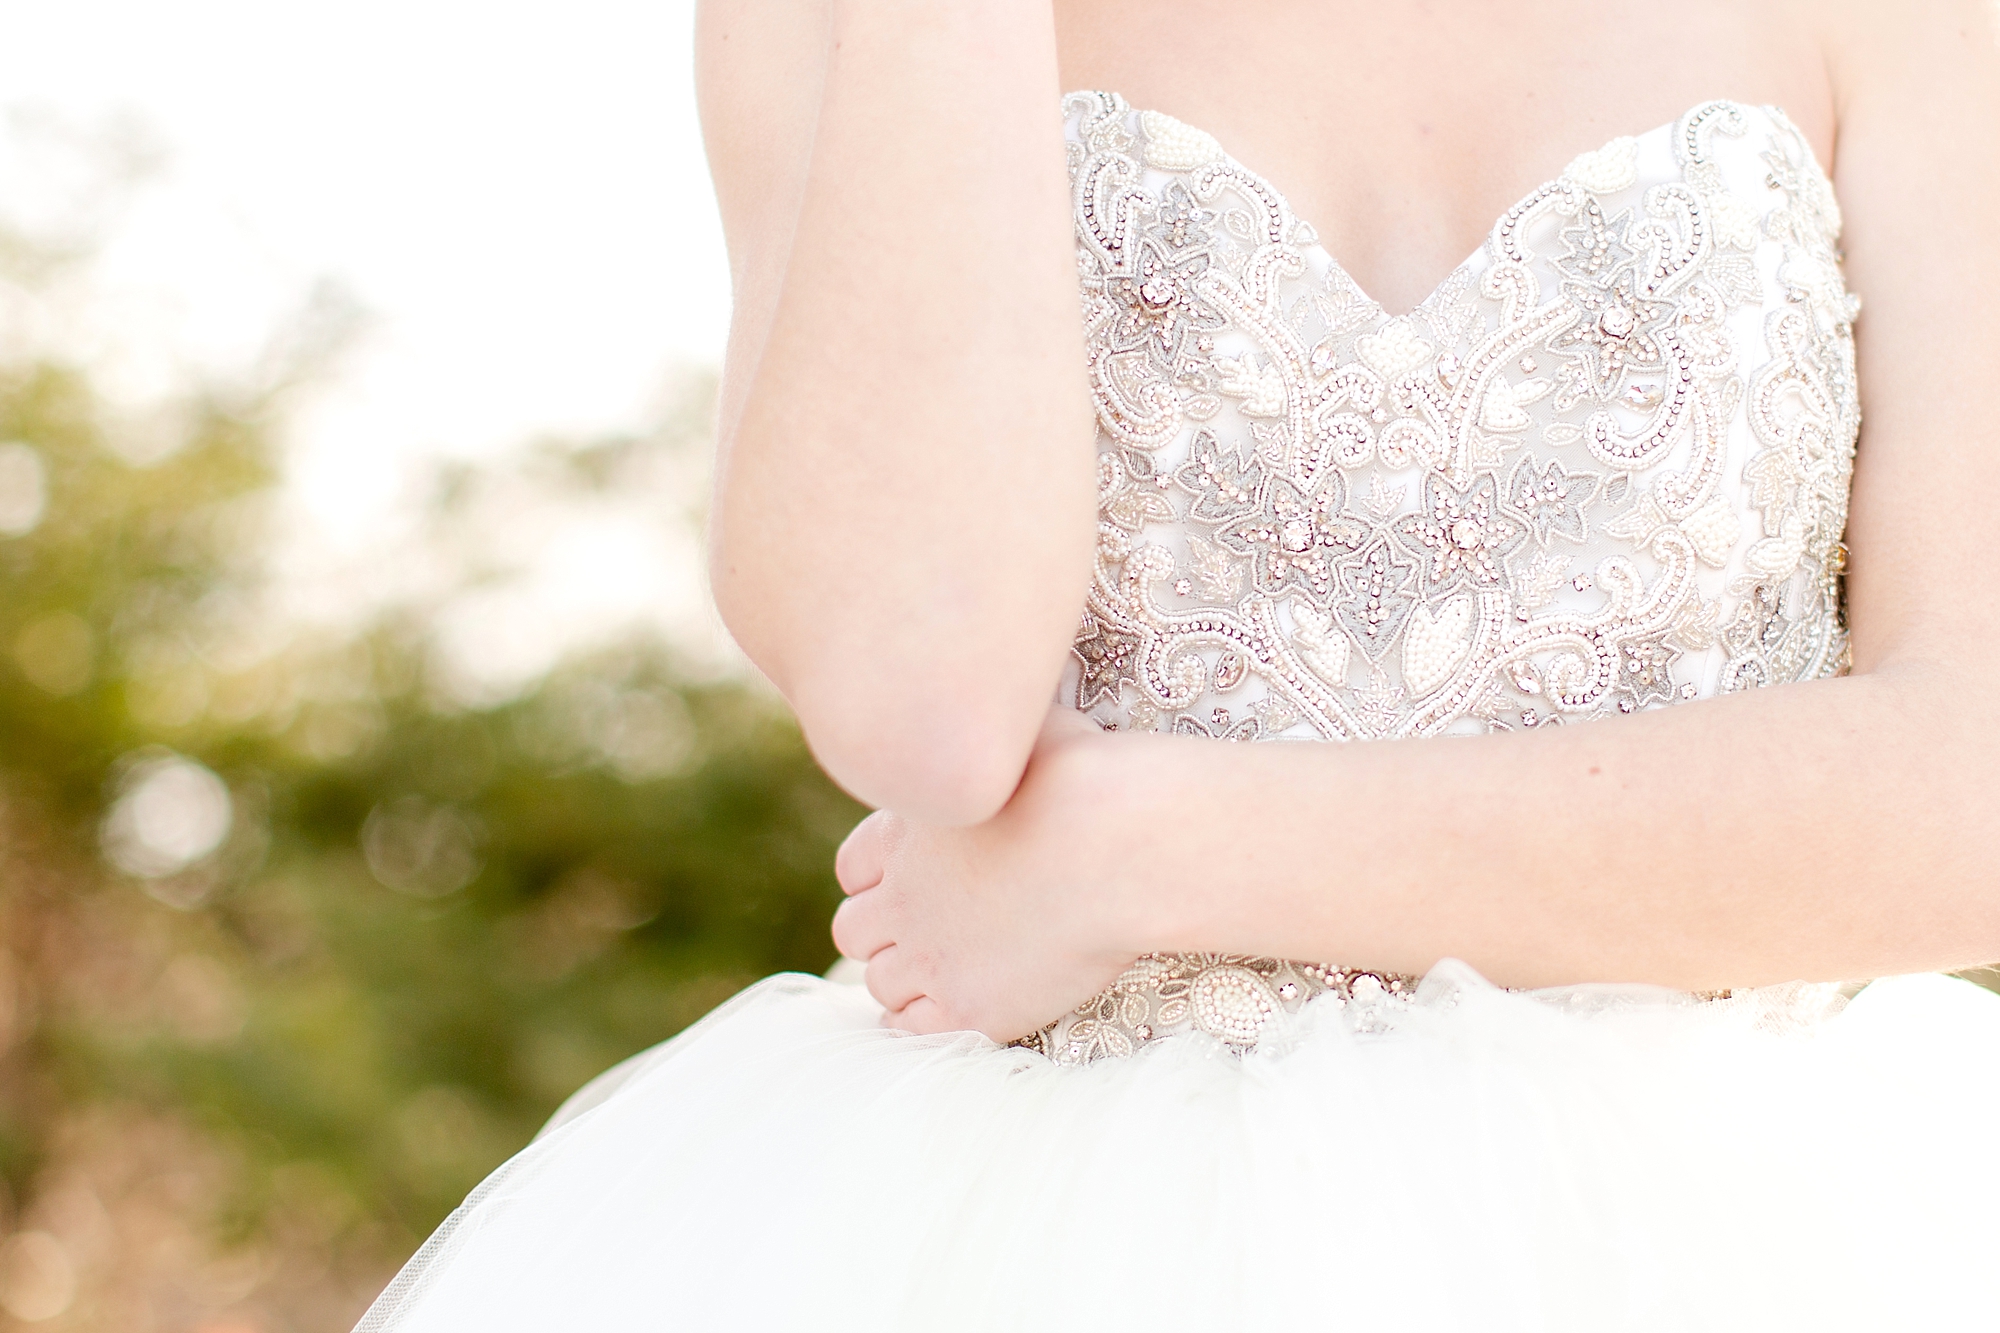  The hand-done beading on this Melissa Gentile dress is exquisite!&nbsp; 